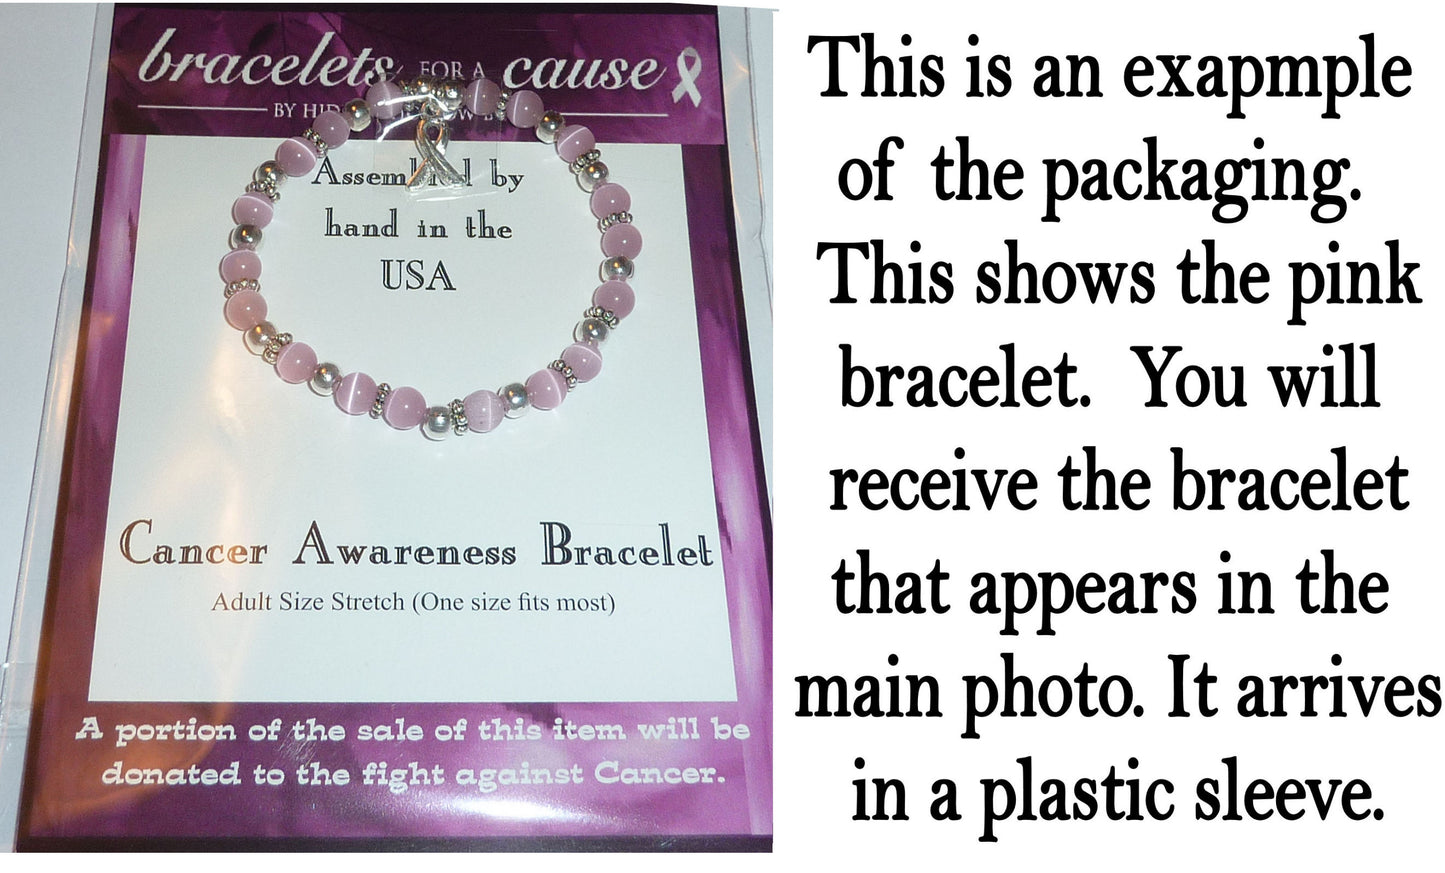 Forest Green (Renal/Kidney) Packaged Cancer Awareness Bracelet 6mm - Stretch (will stretch to fit most Adults)